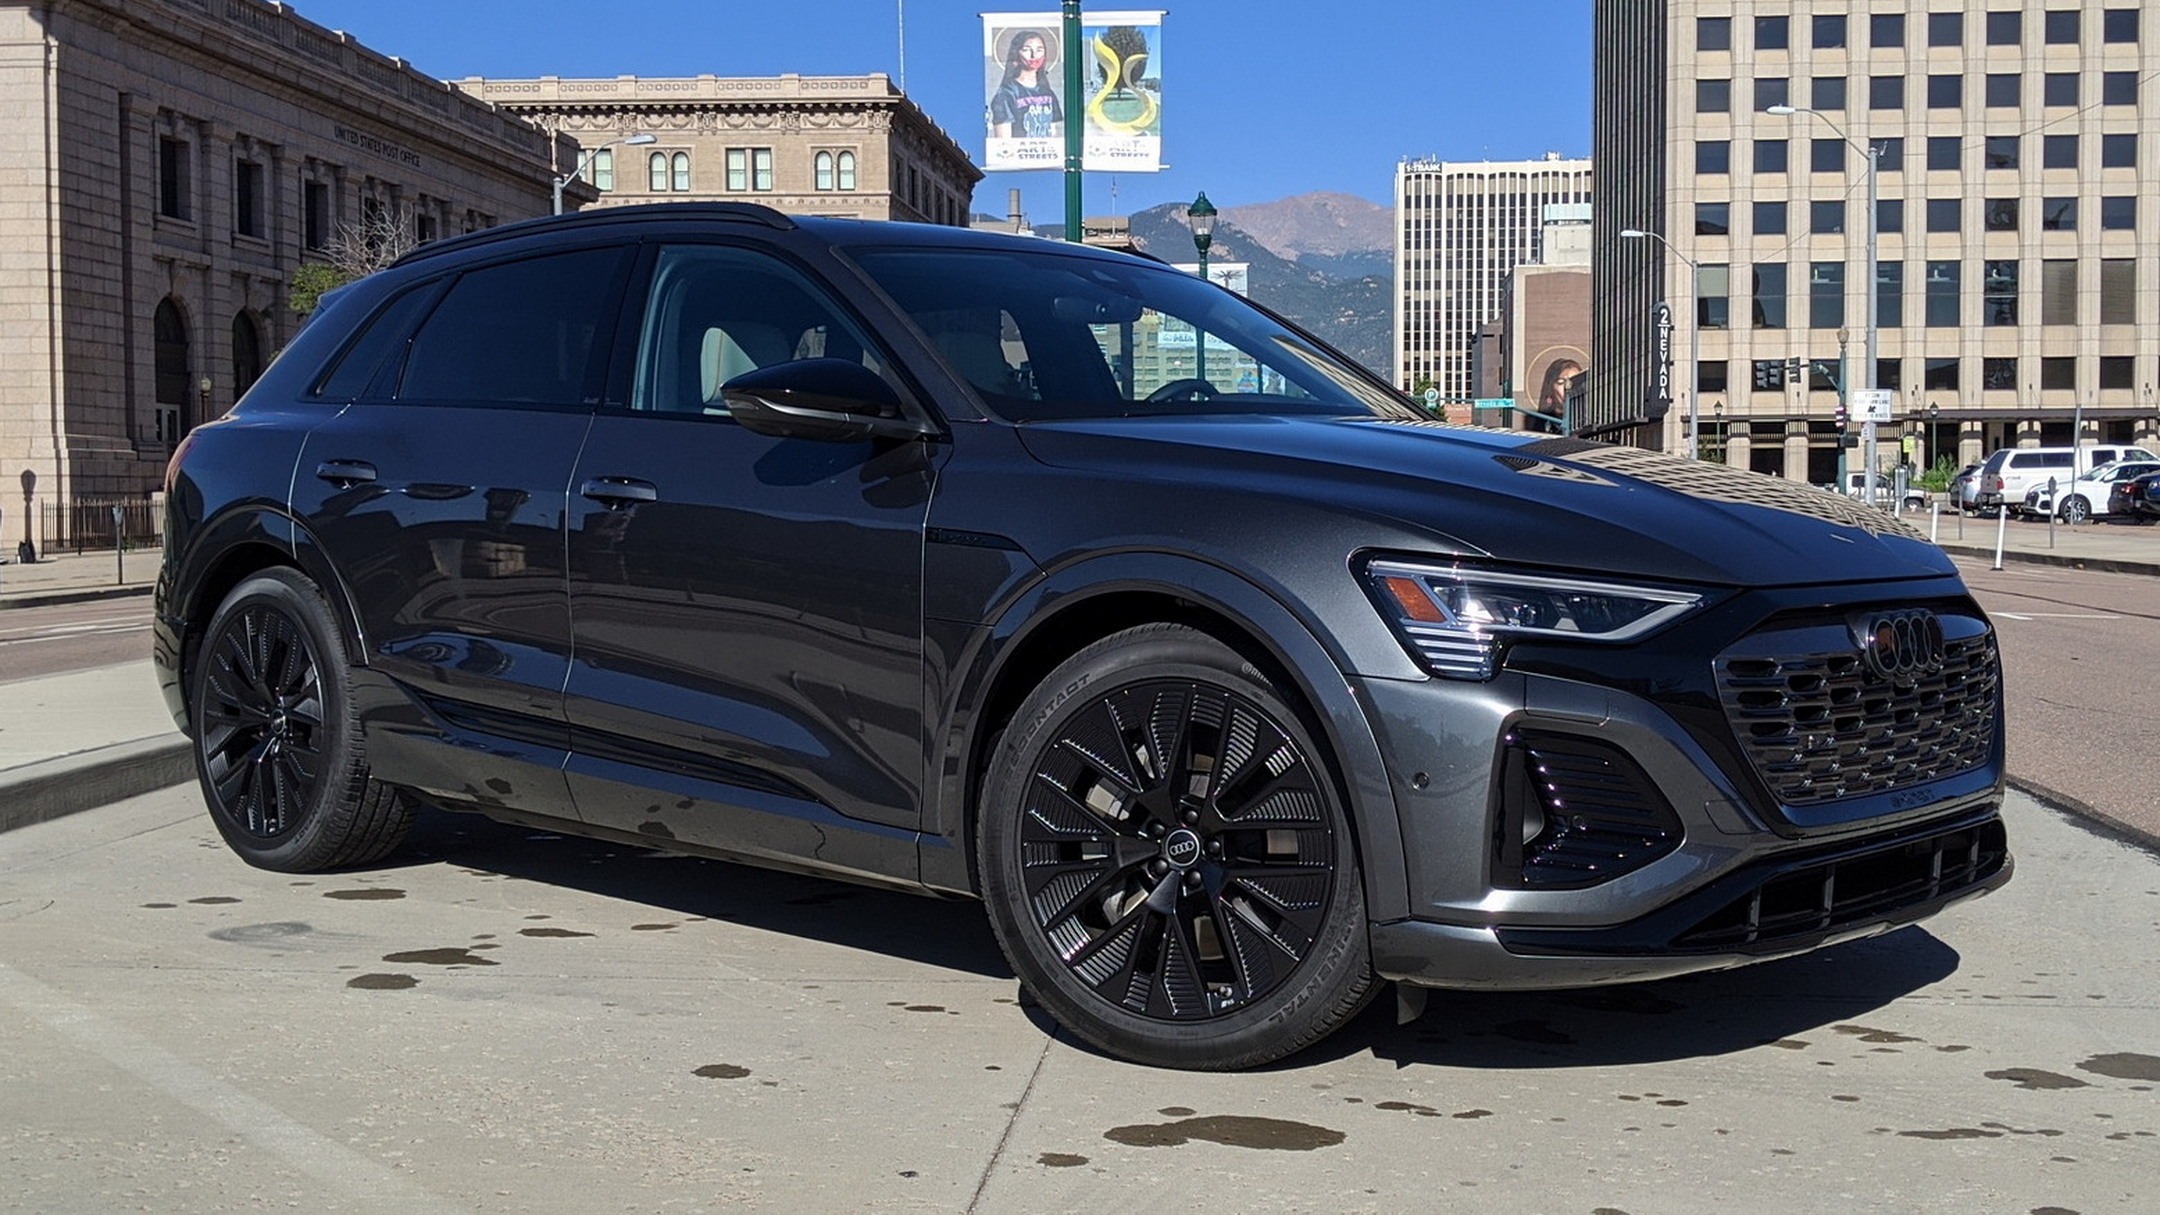 We're Driving The 2024 Audi Q8 e-tron: What Do You Want To Know